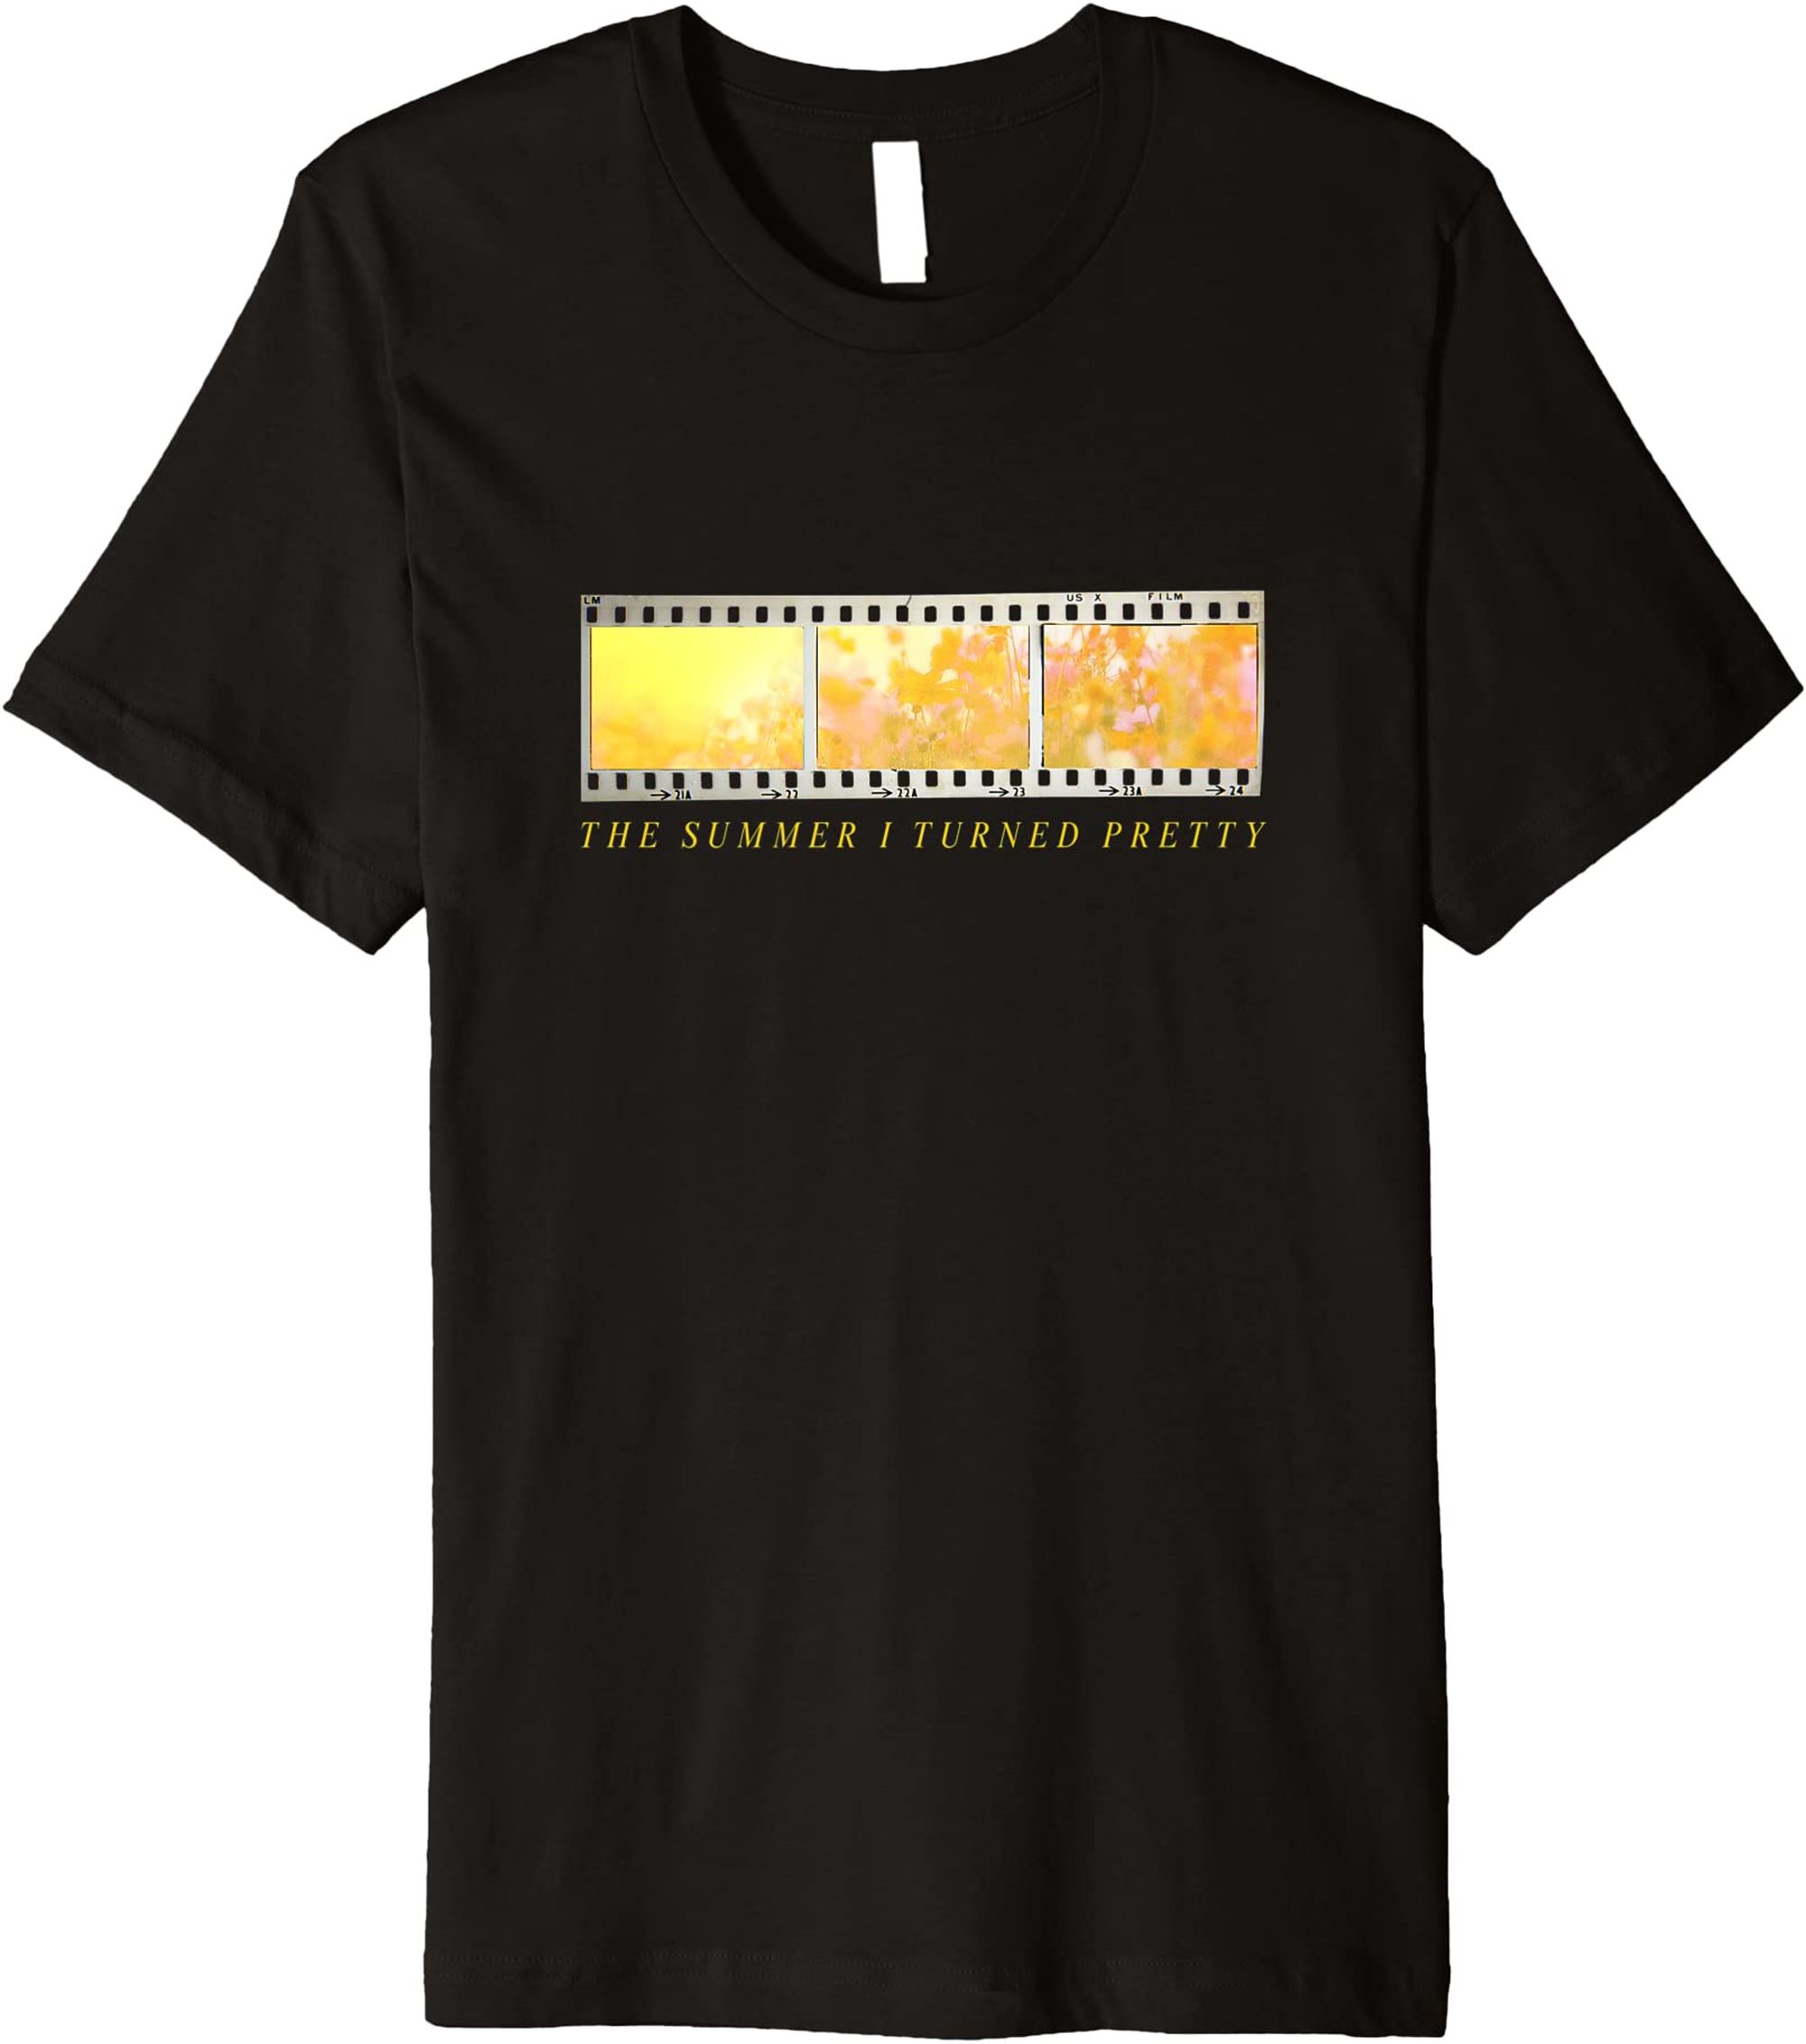 The Summer I Turned Pretty Film Strip Premium T-shirt Size Up To 5xl